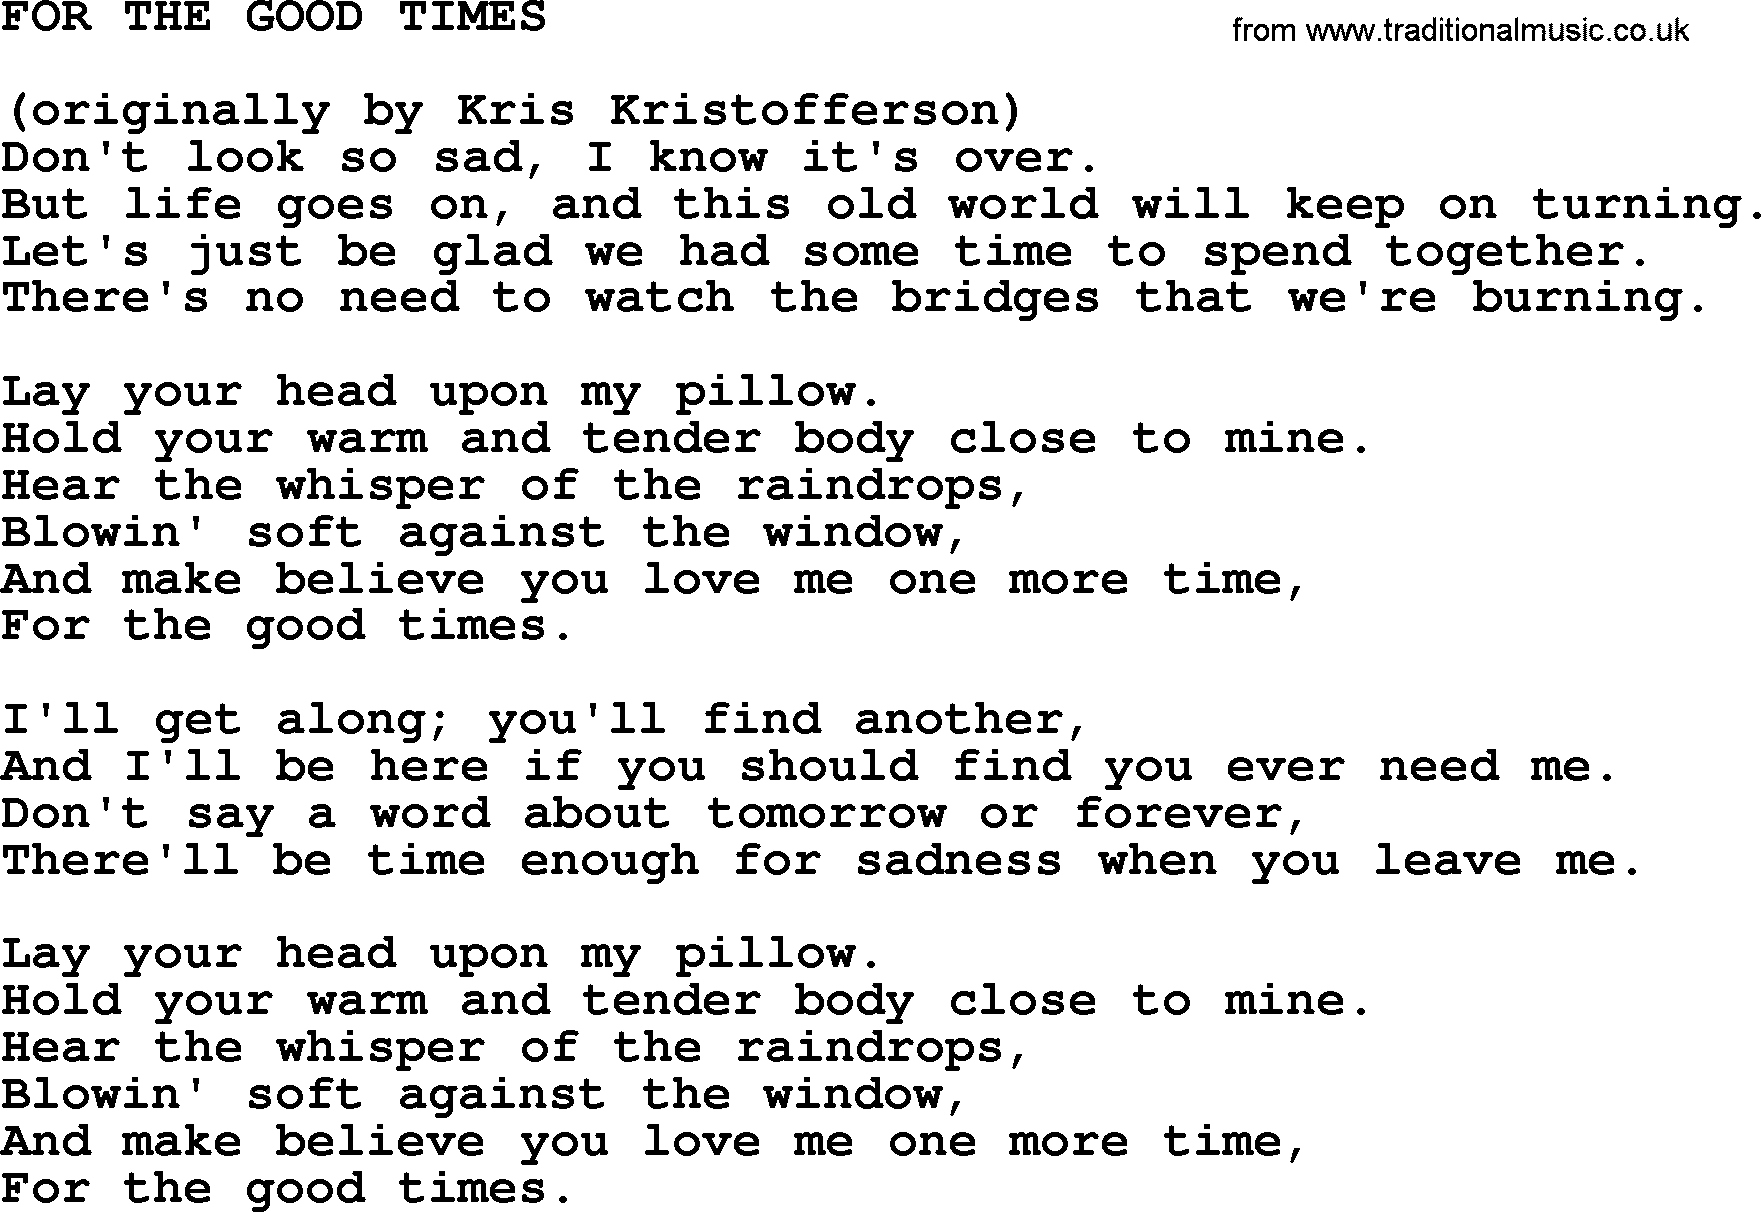 Johnny Cash song For The Good Times.txt lyrics